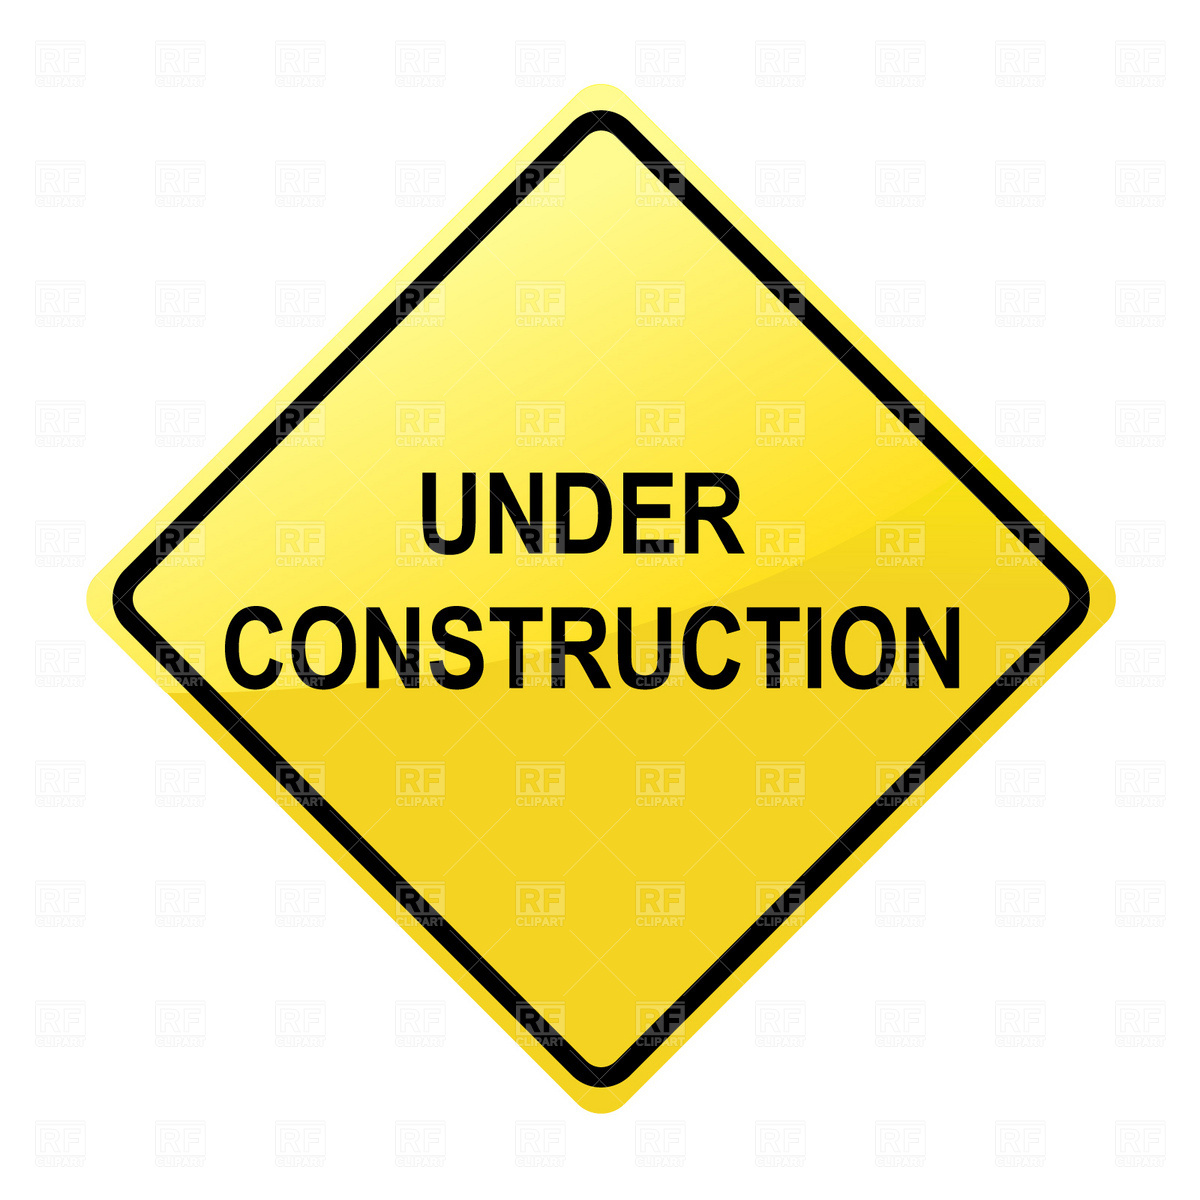 Under Construction Sign 1678 Signs Symbols Maps Download Free